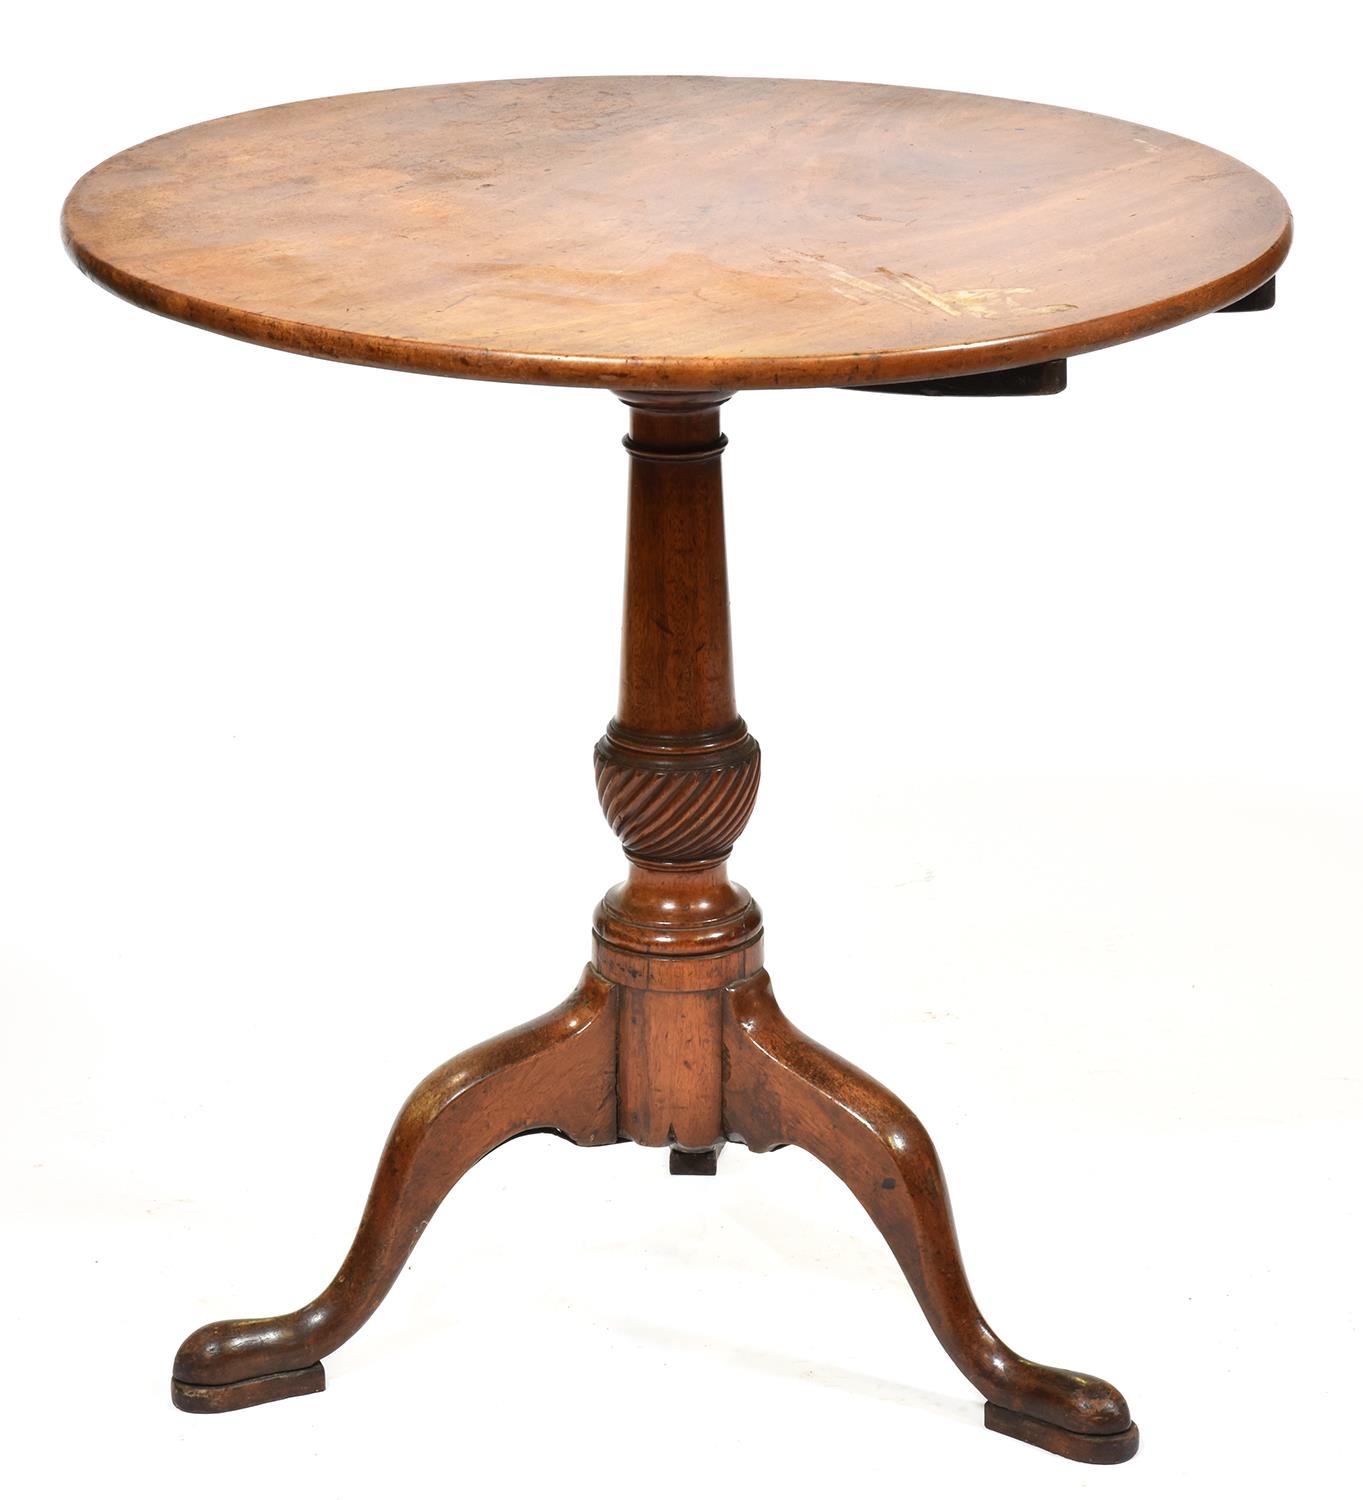 A George III mahogany tripod table, late 18th c, the tapered pillar with spirally reed knop, on